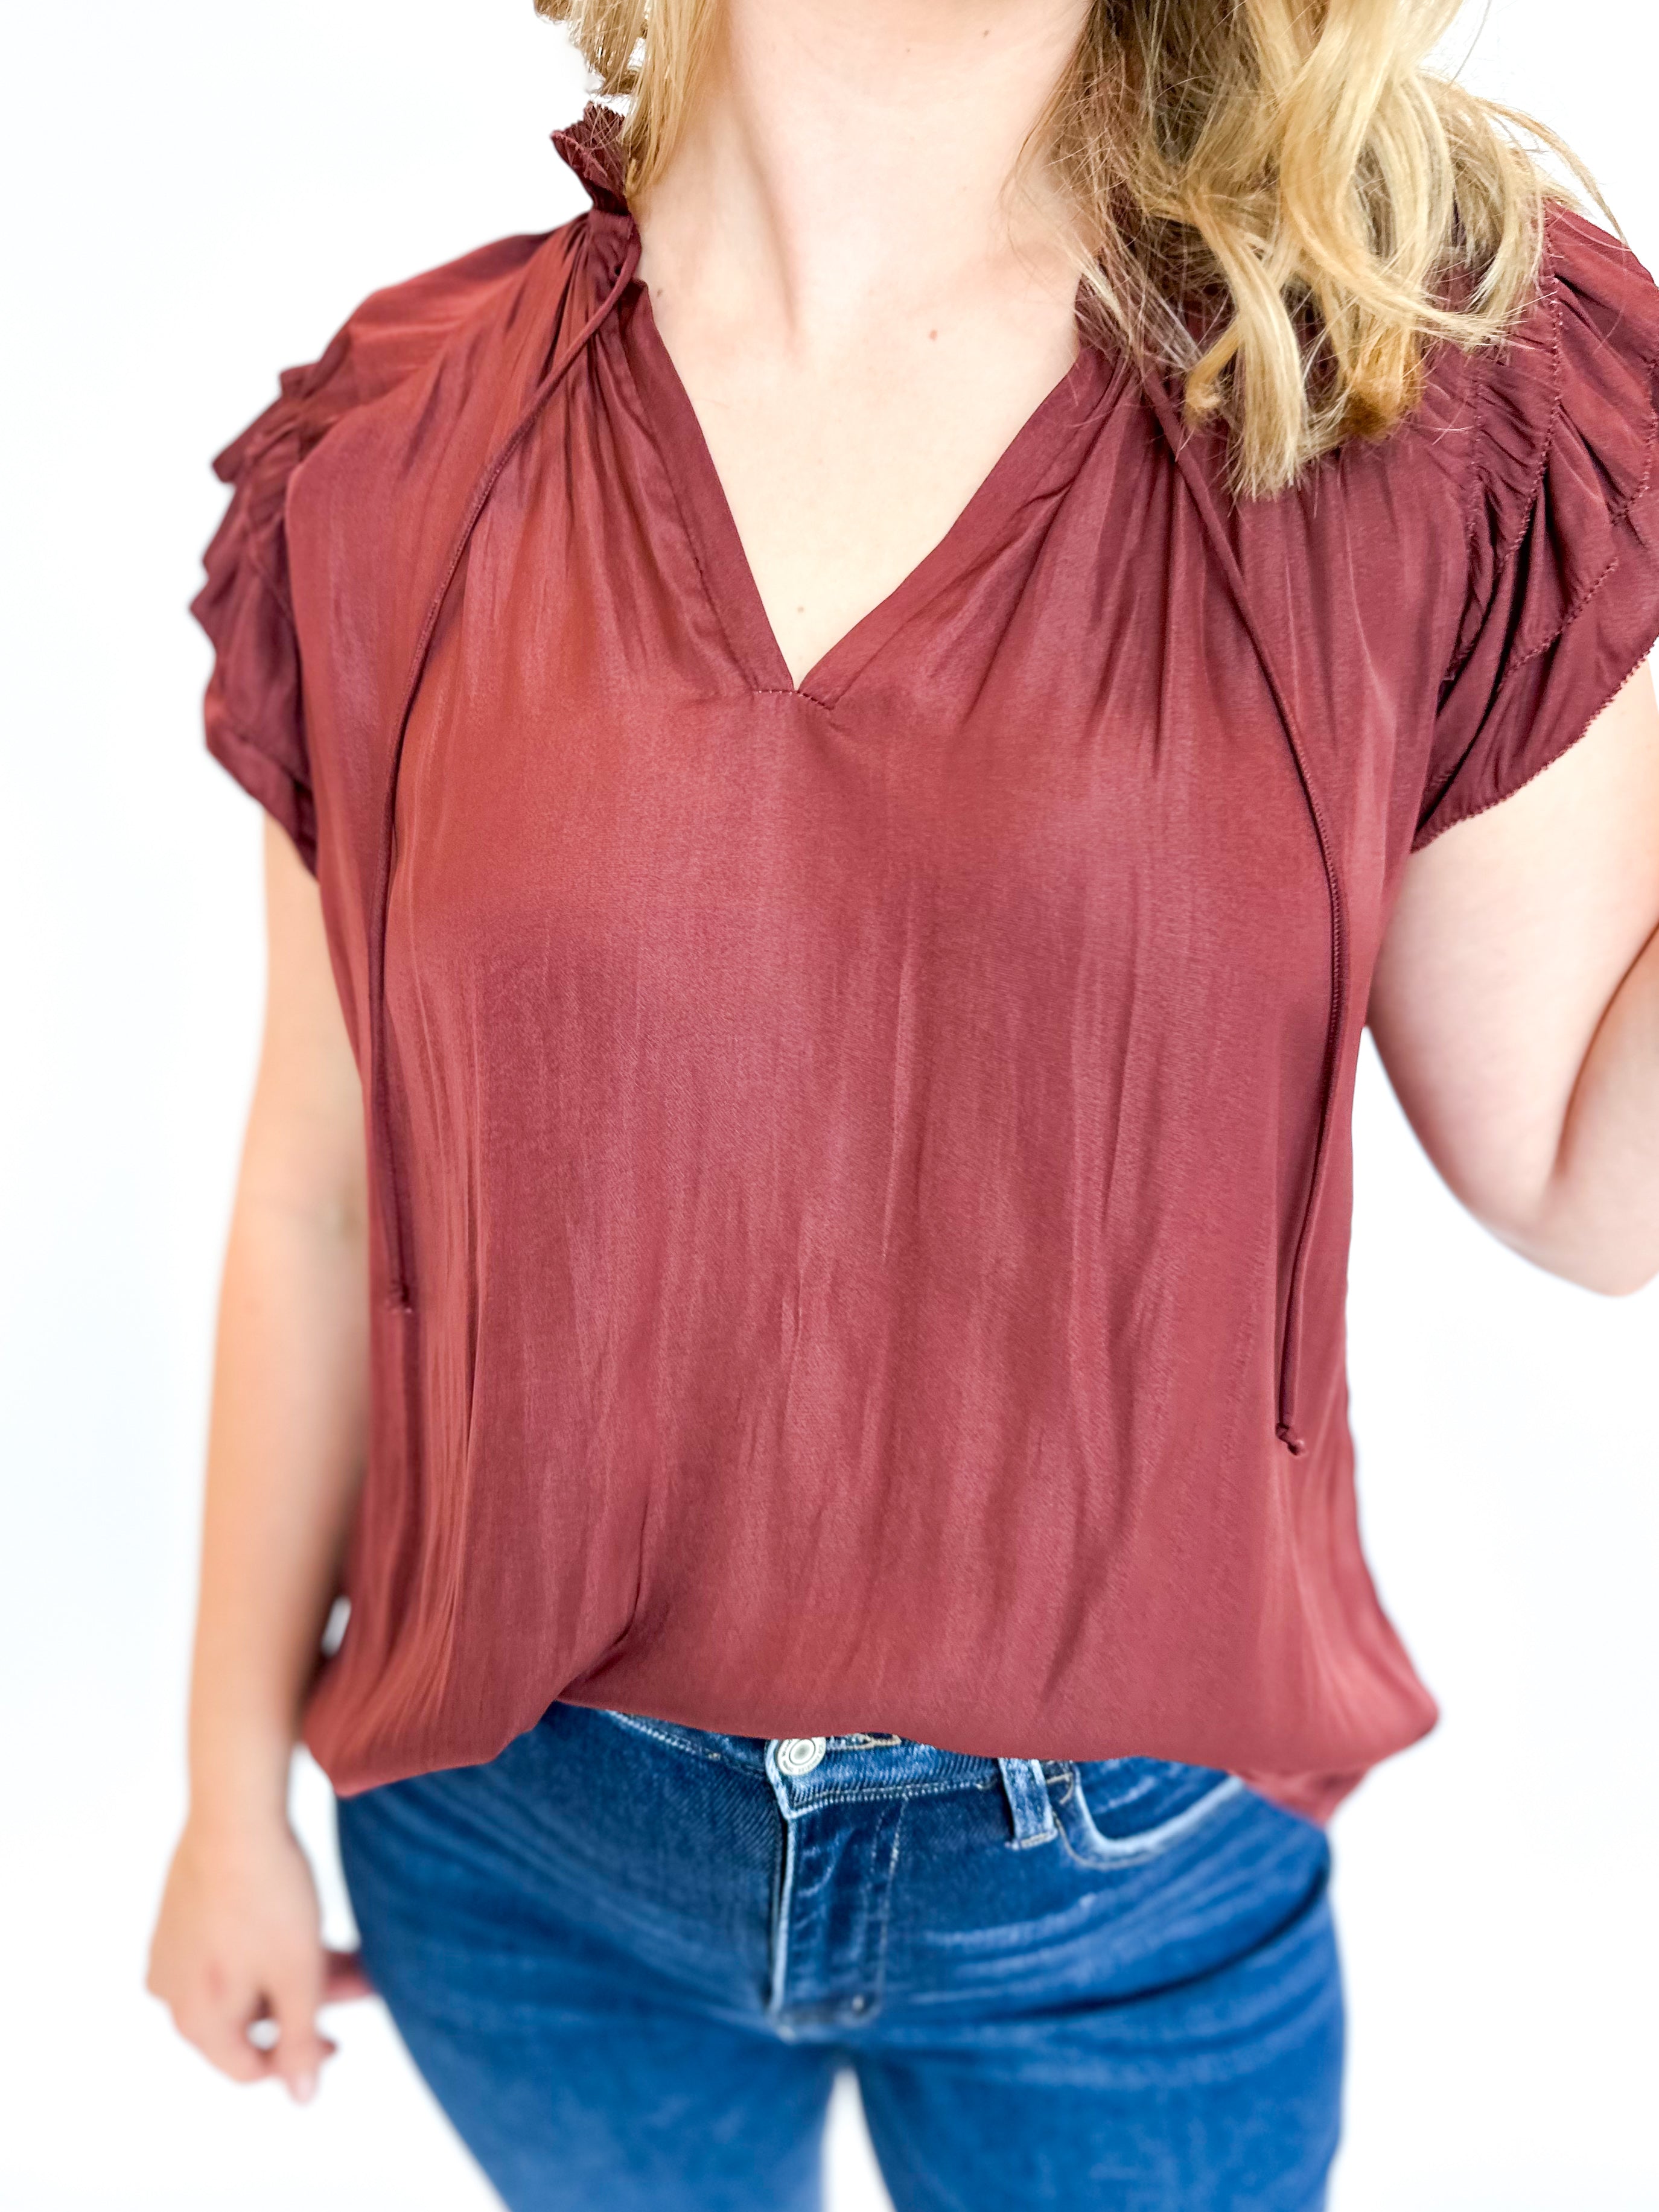 Your Holiday Satin Blouse - Burgundy-200 Fashion Blouses-GRADE & GATHER-July & June Women's Fashion Boutique Located in San Antonio, Texas